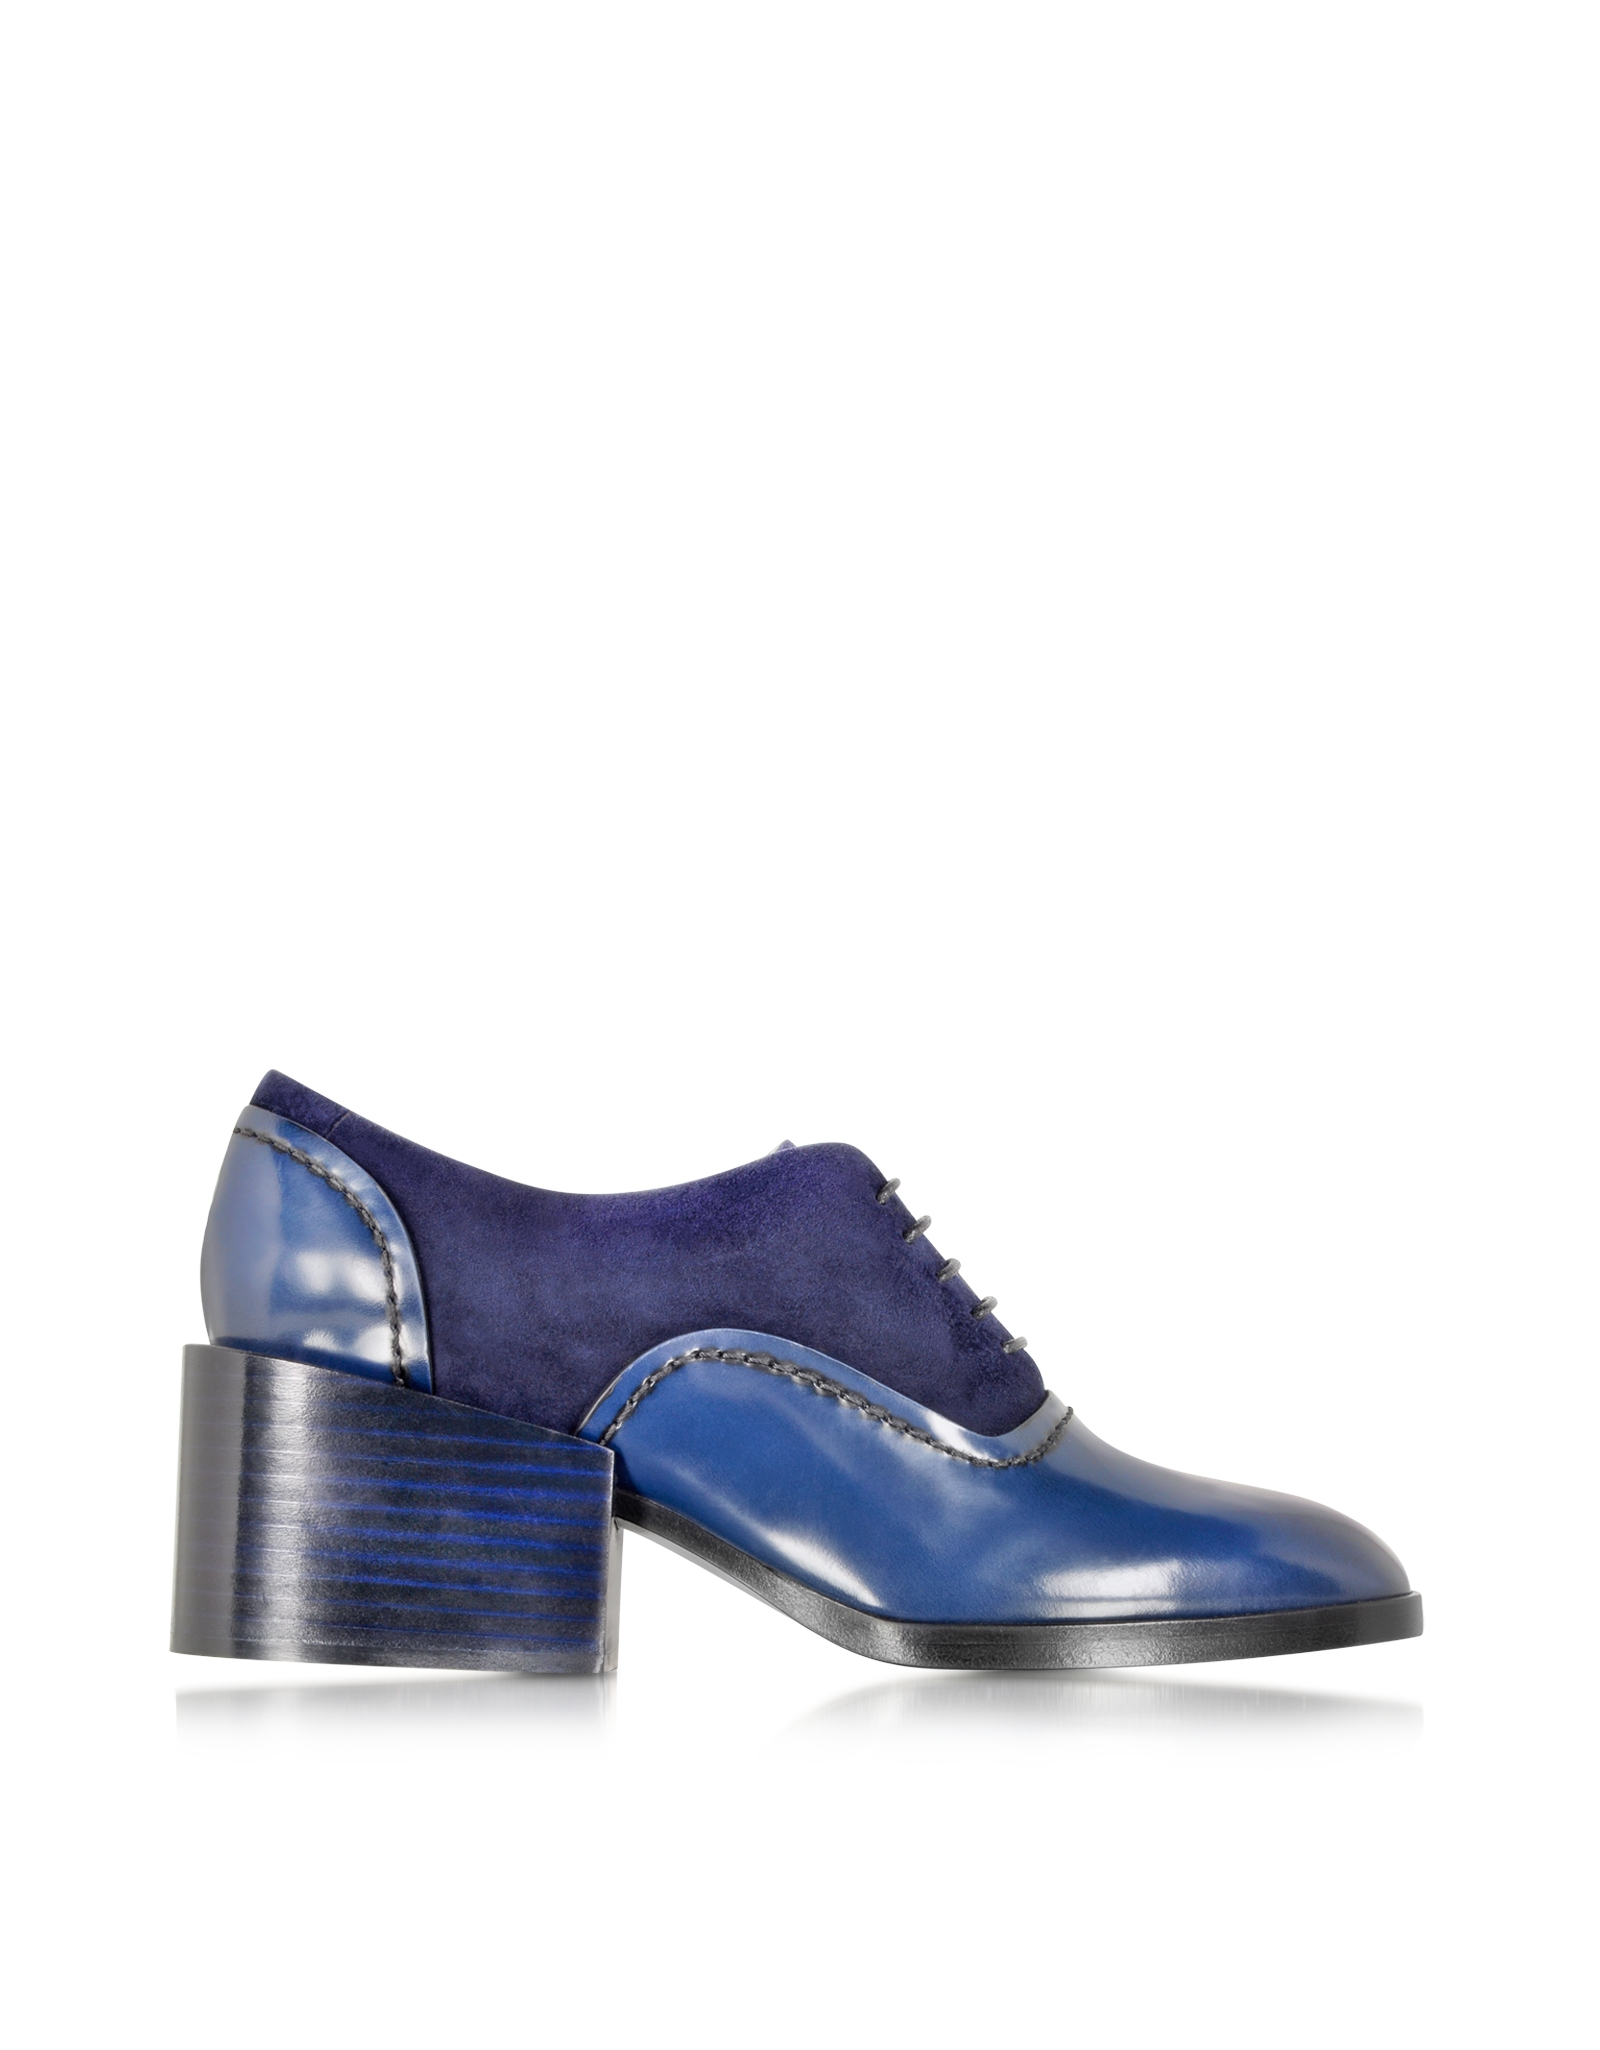 Lyst - Jil Sander Navy Blue Leather And Suede Lace-up Shoe in Blue